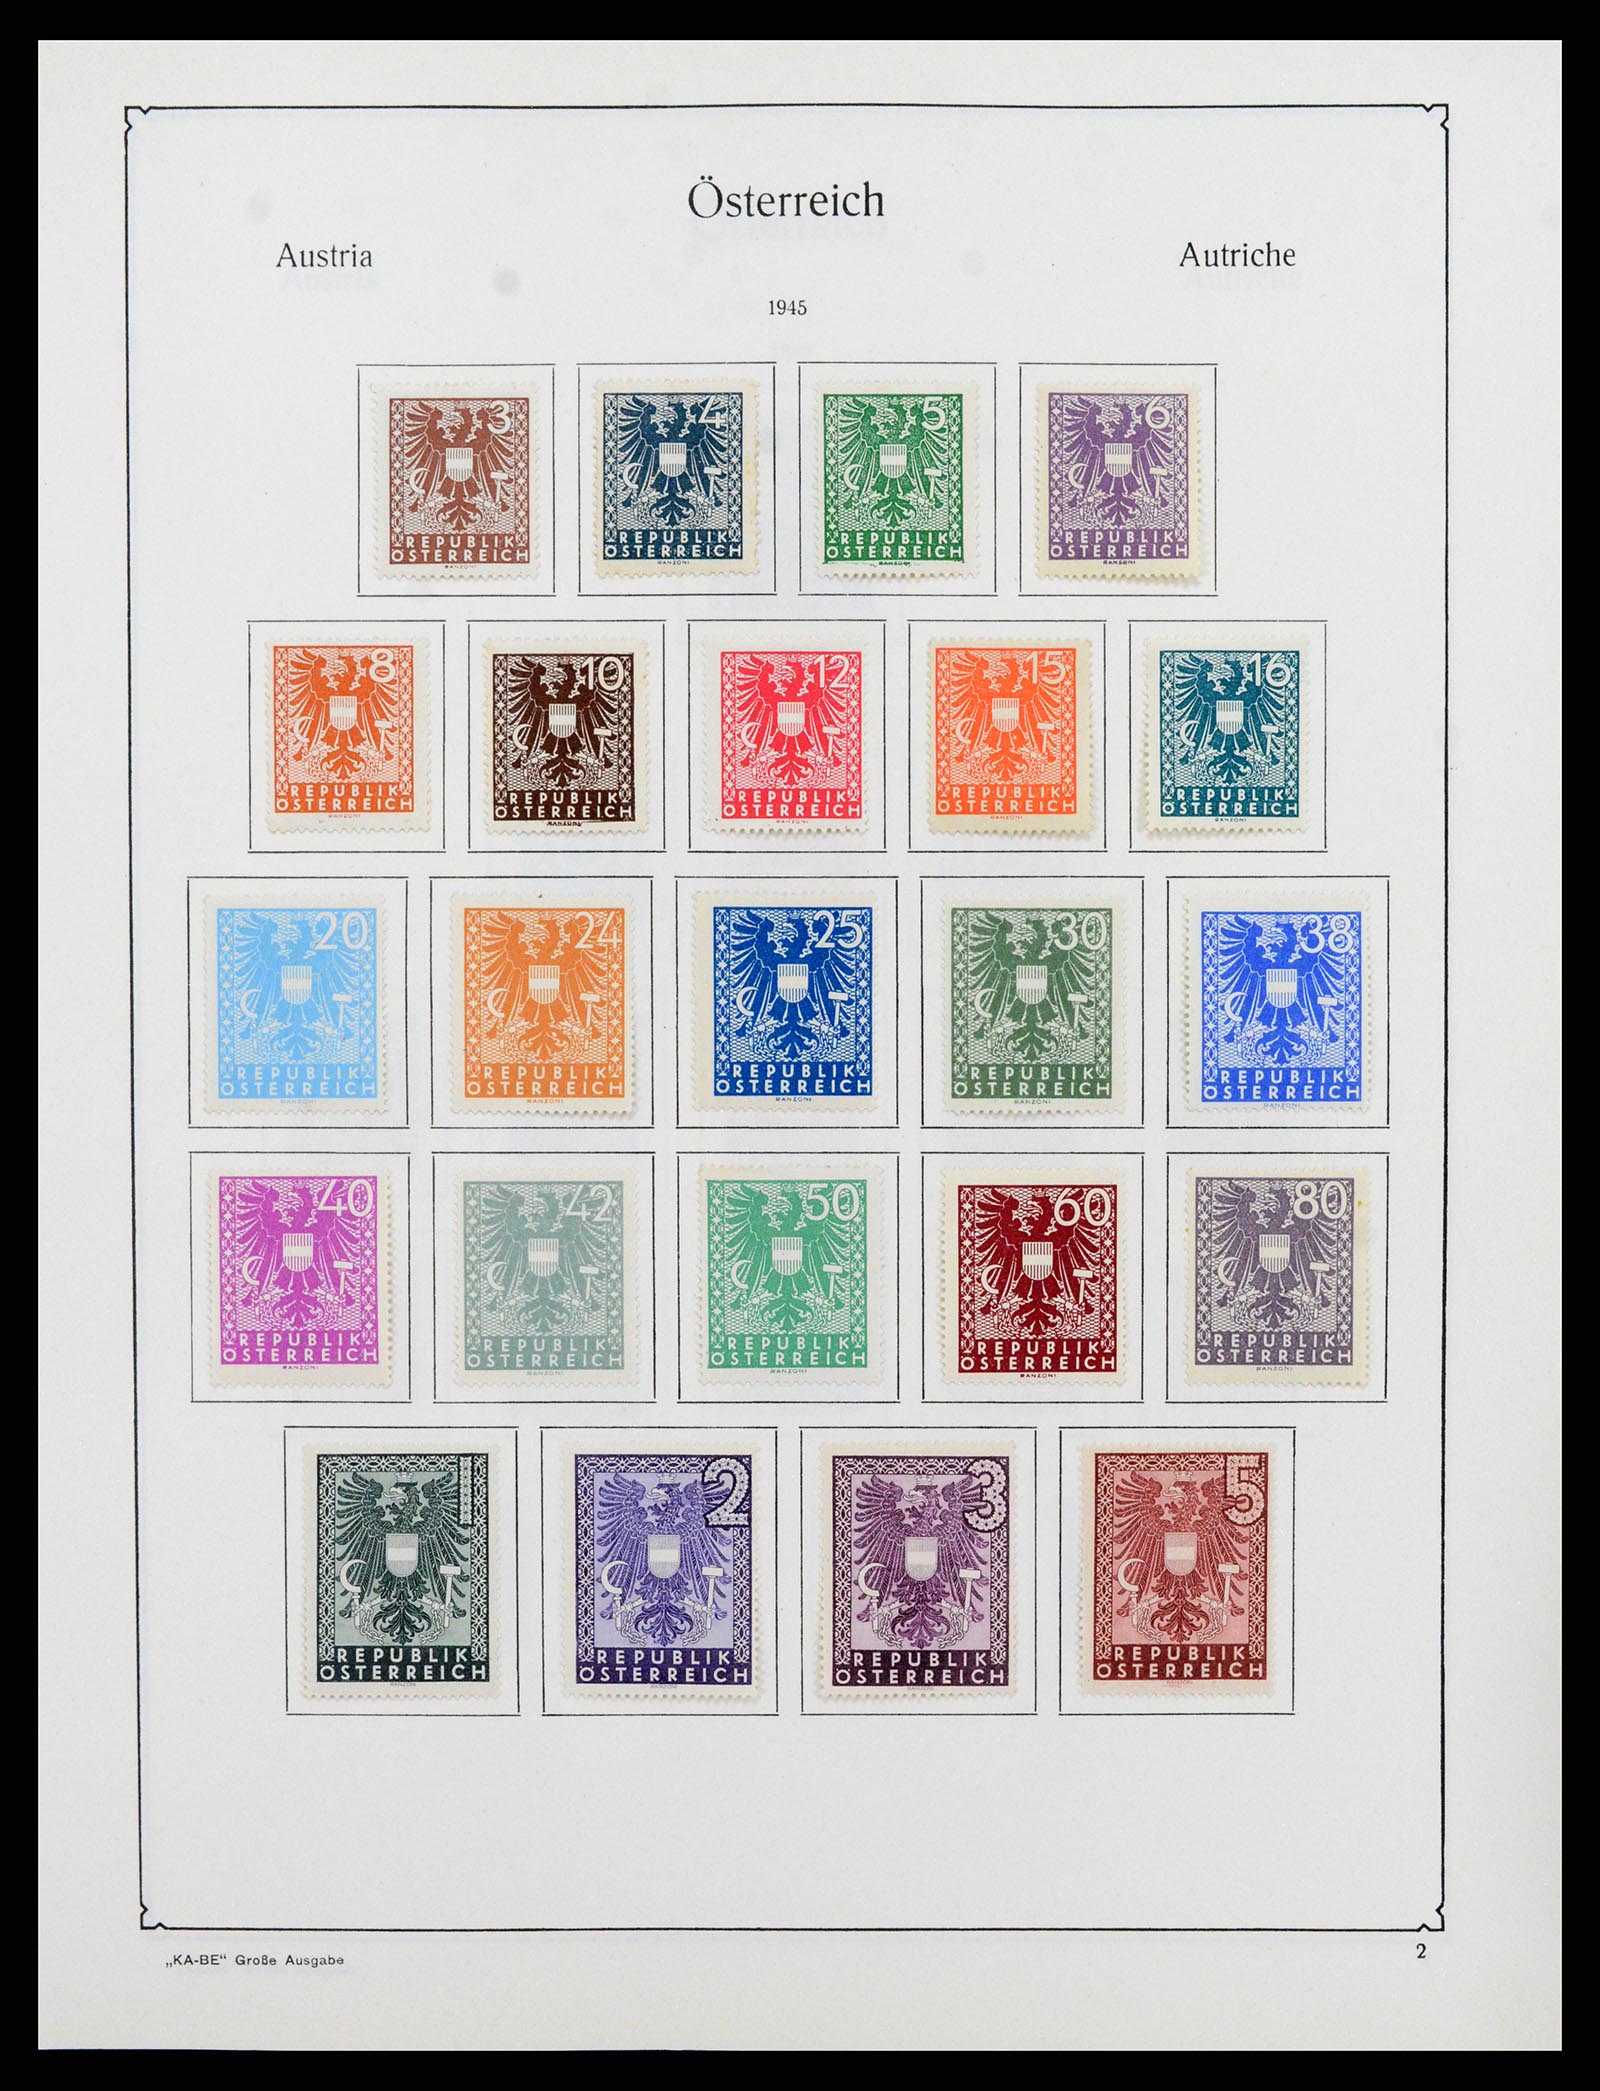 37960 100 - Stamp collection 37960 Austria and territories 1850-1984.